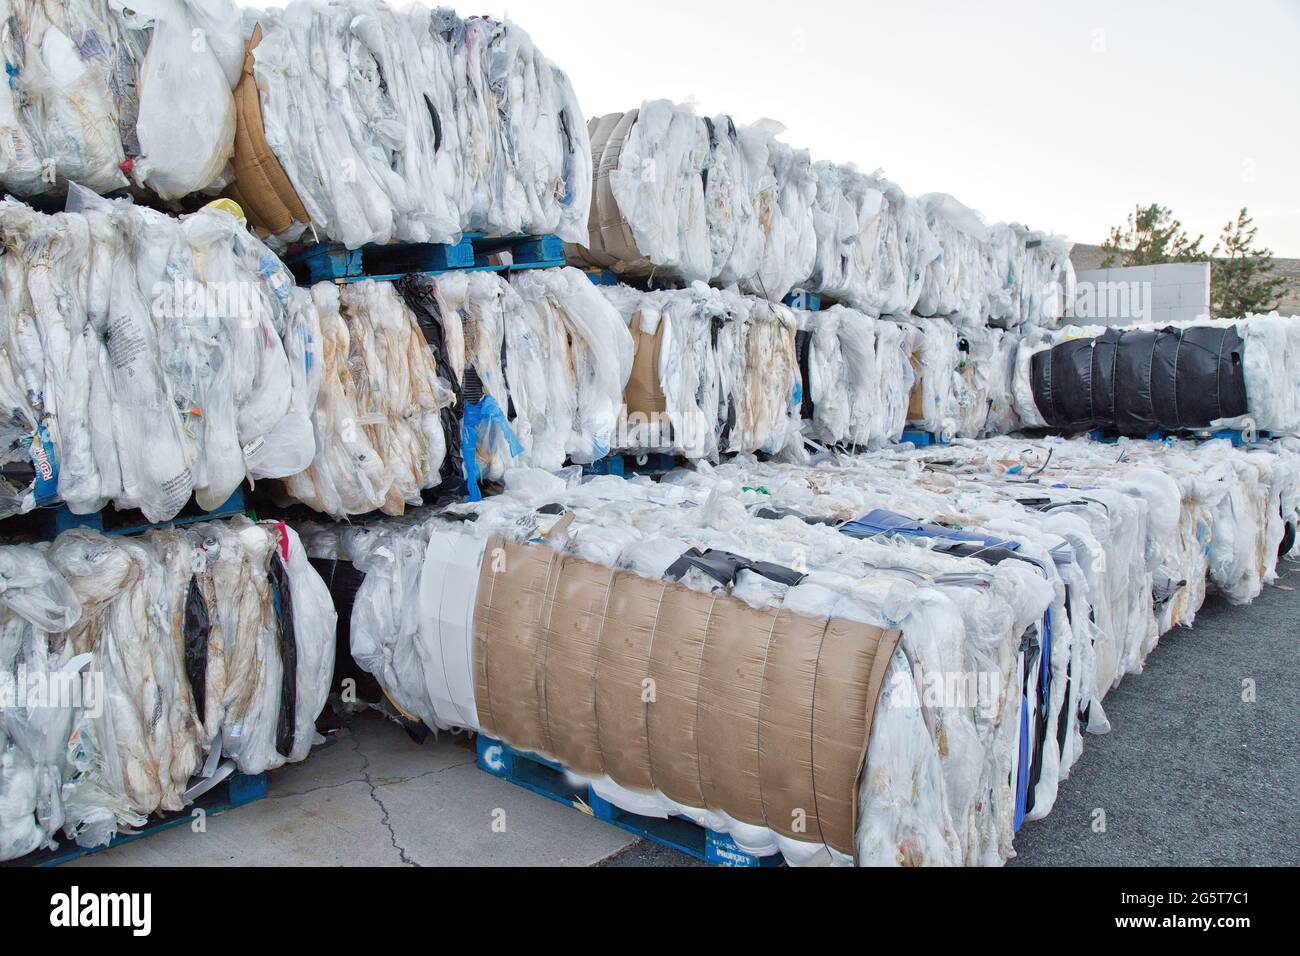 Compacted, baled plastics to be recycled. Stock Photo